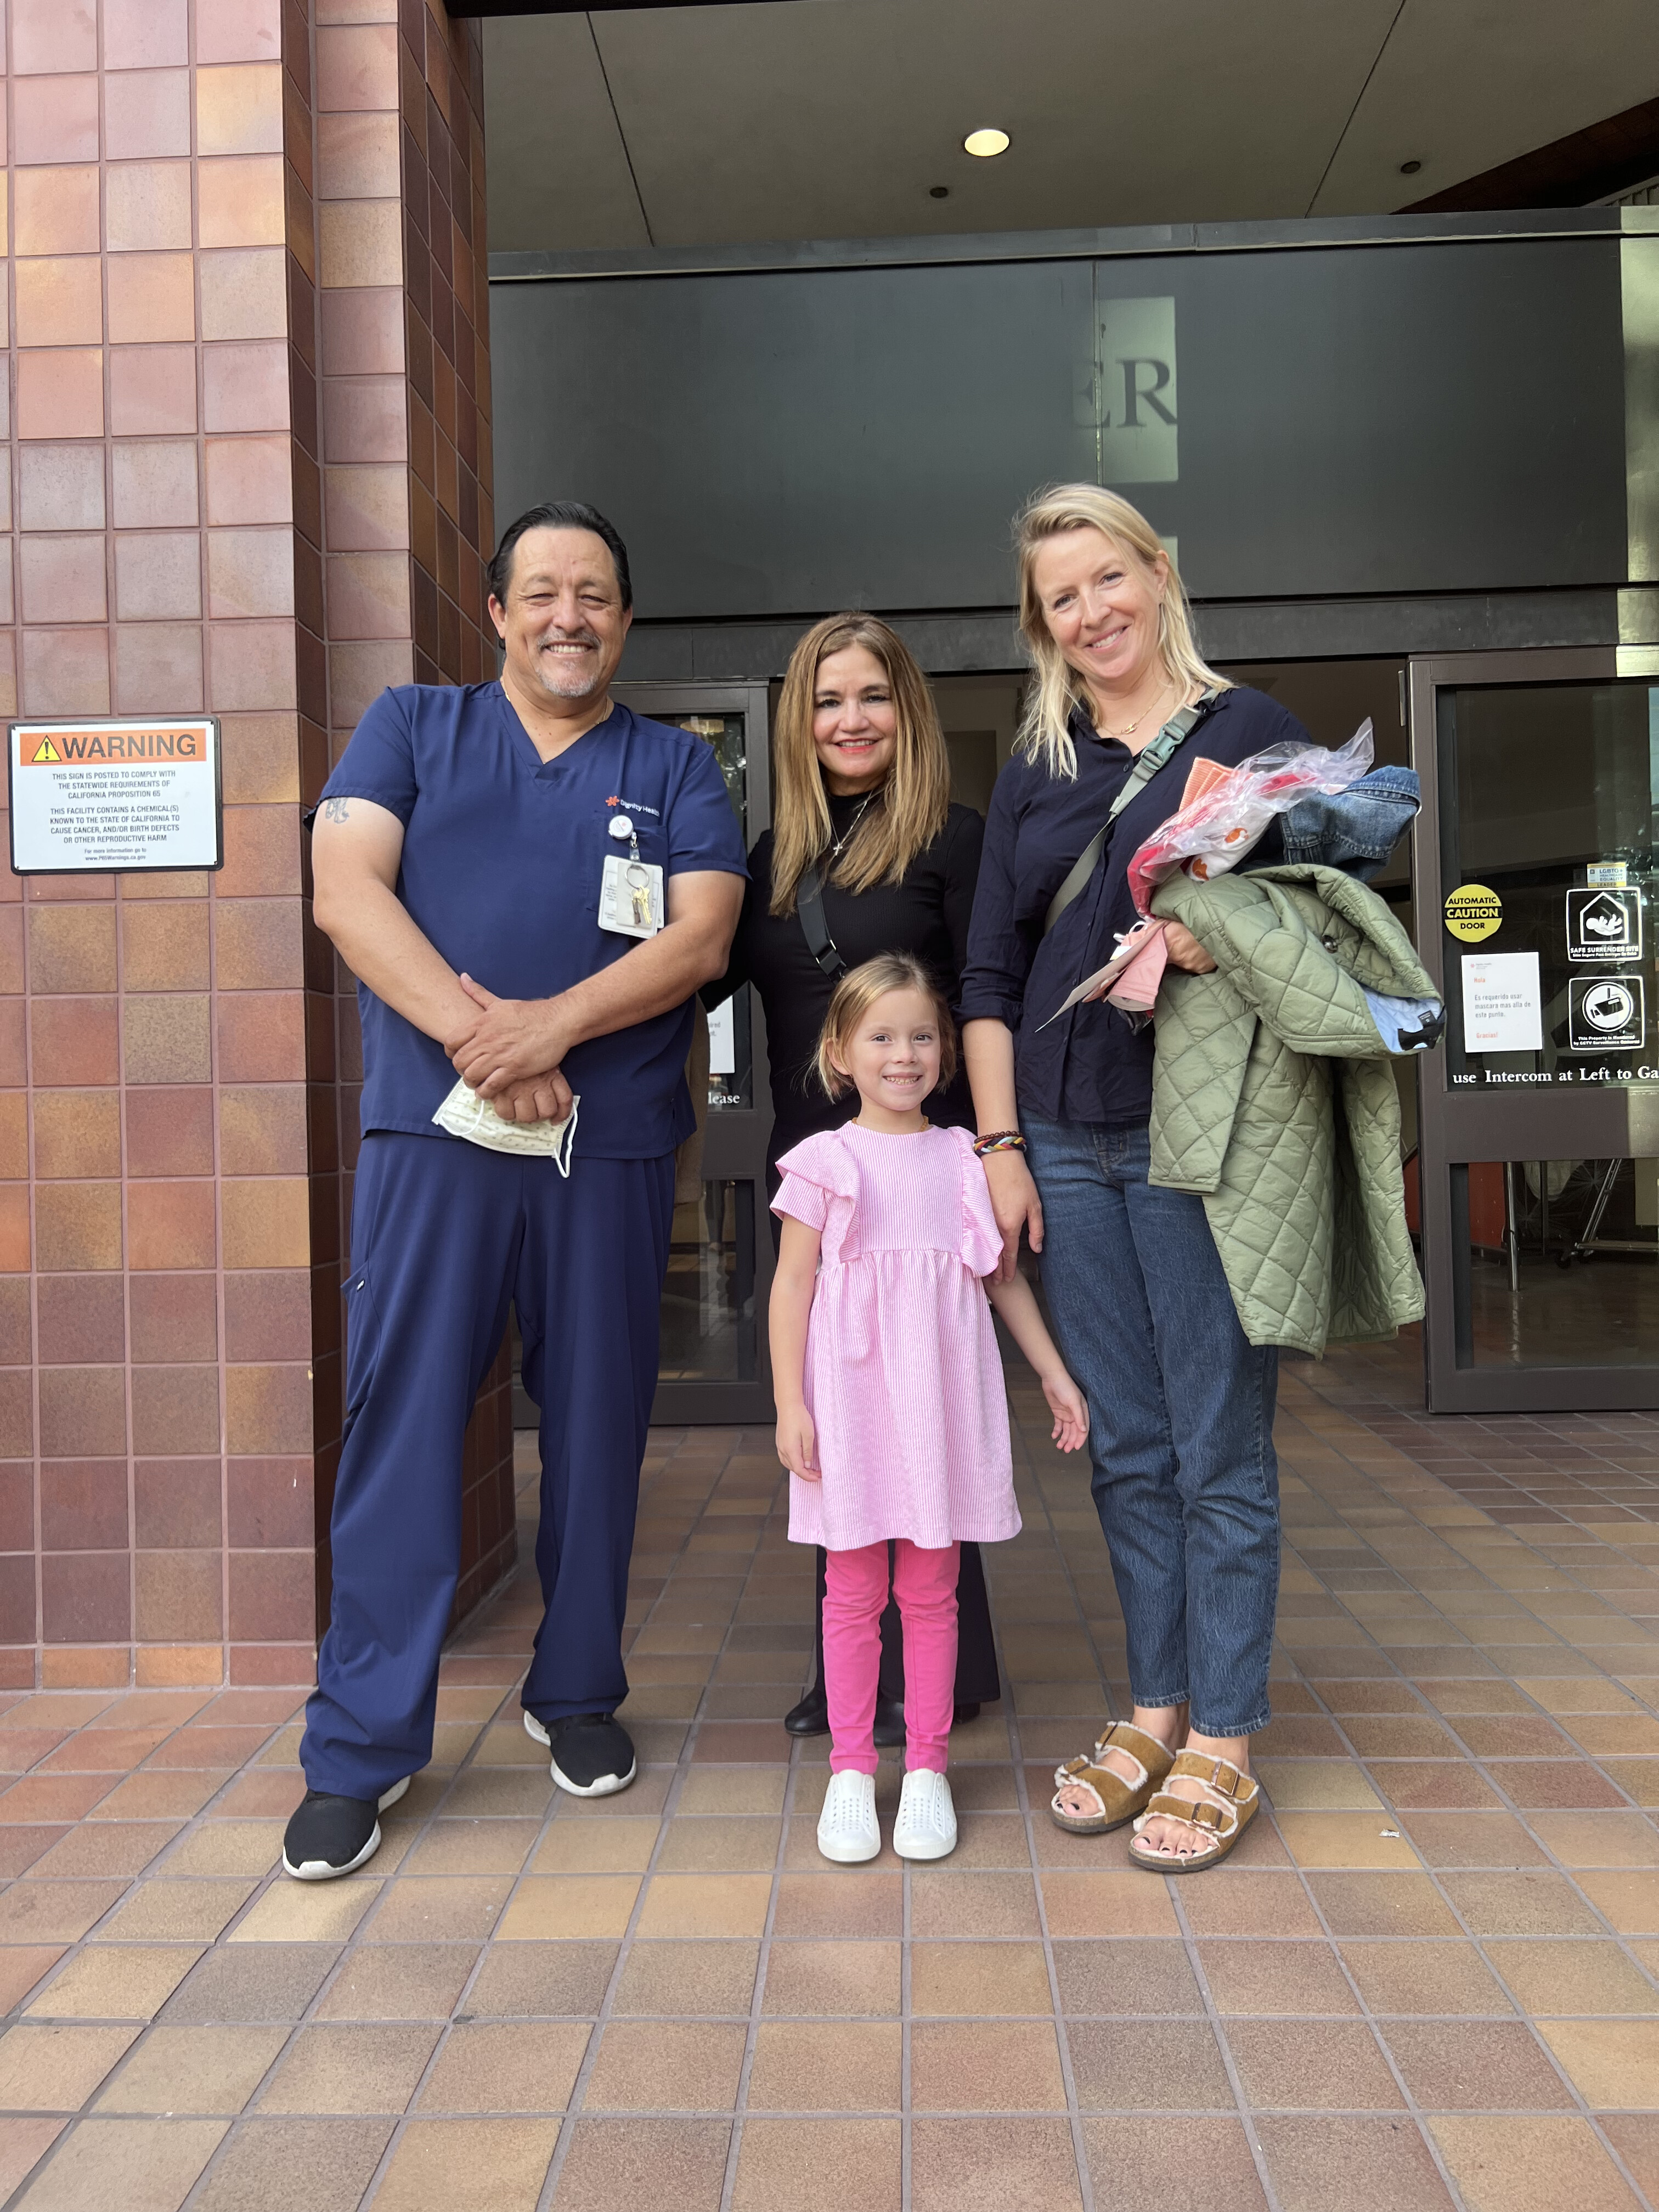 NICU Director Tony Marcelli, MSN, RN, Glenda Minjares, RN, Mallory and Joanna Nagata standing in from of the main entrance to California Hospital